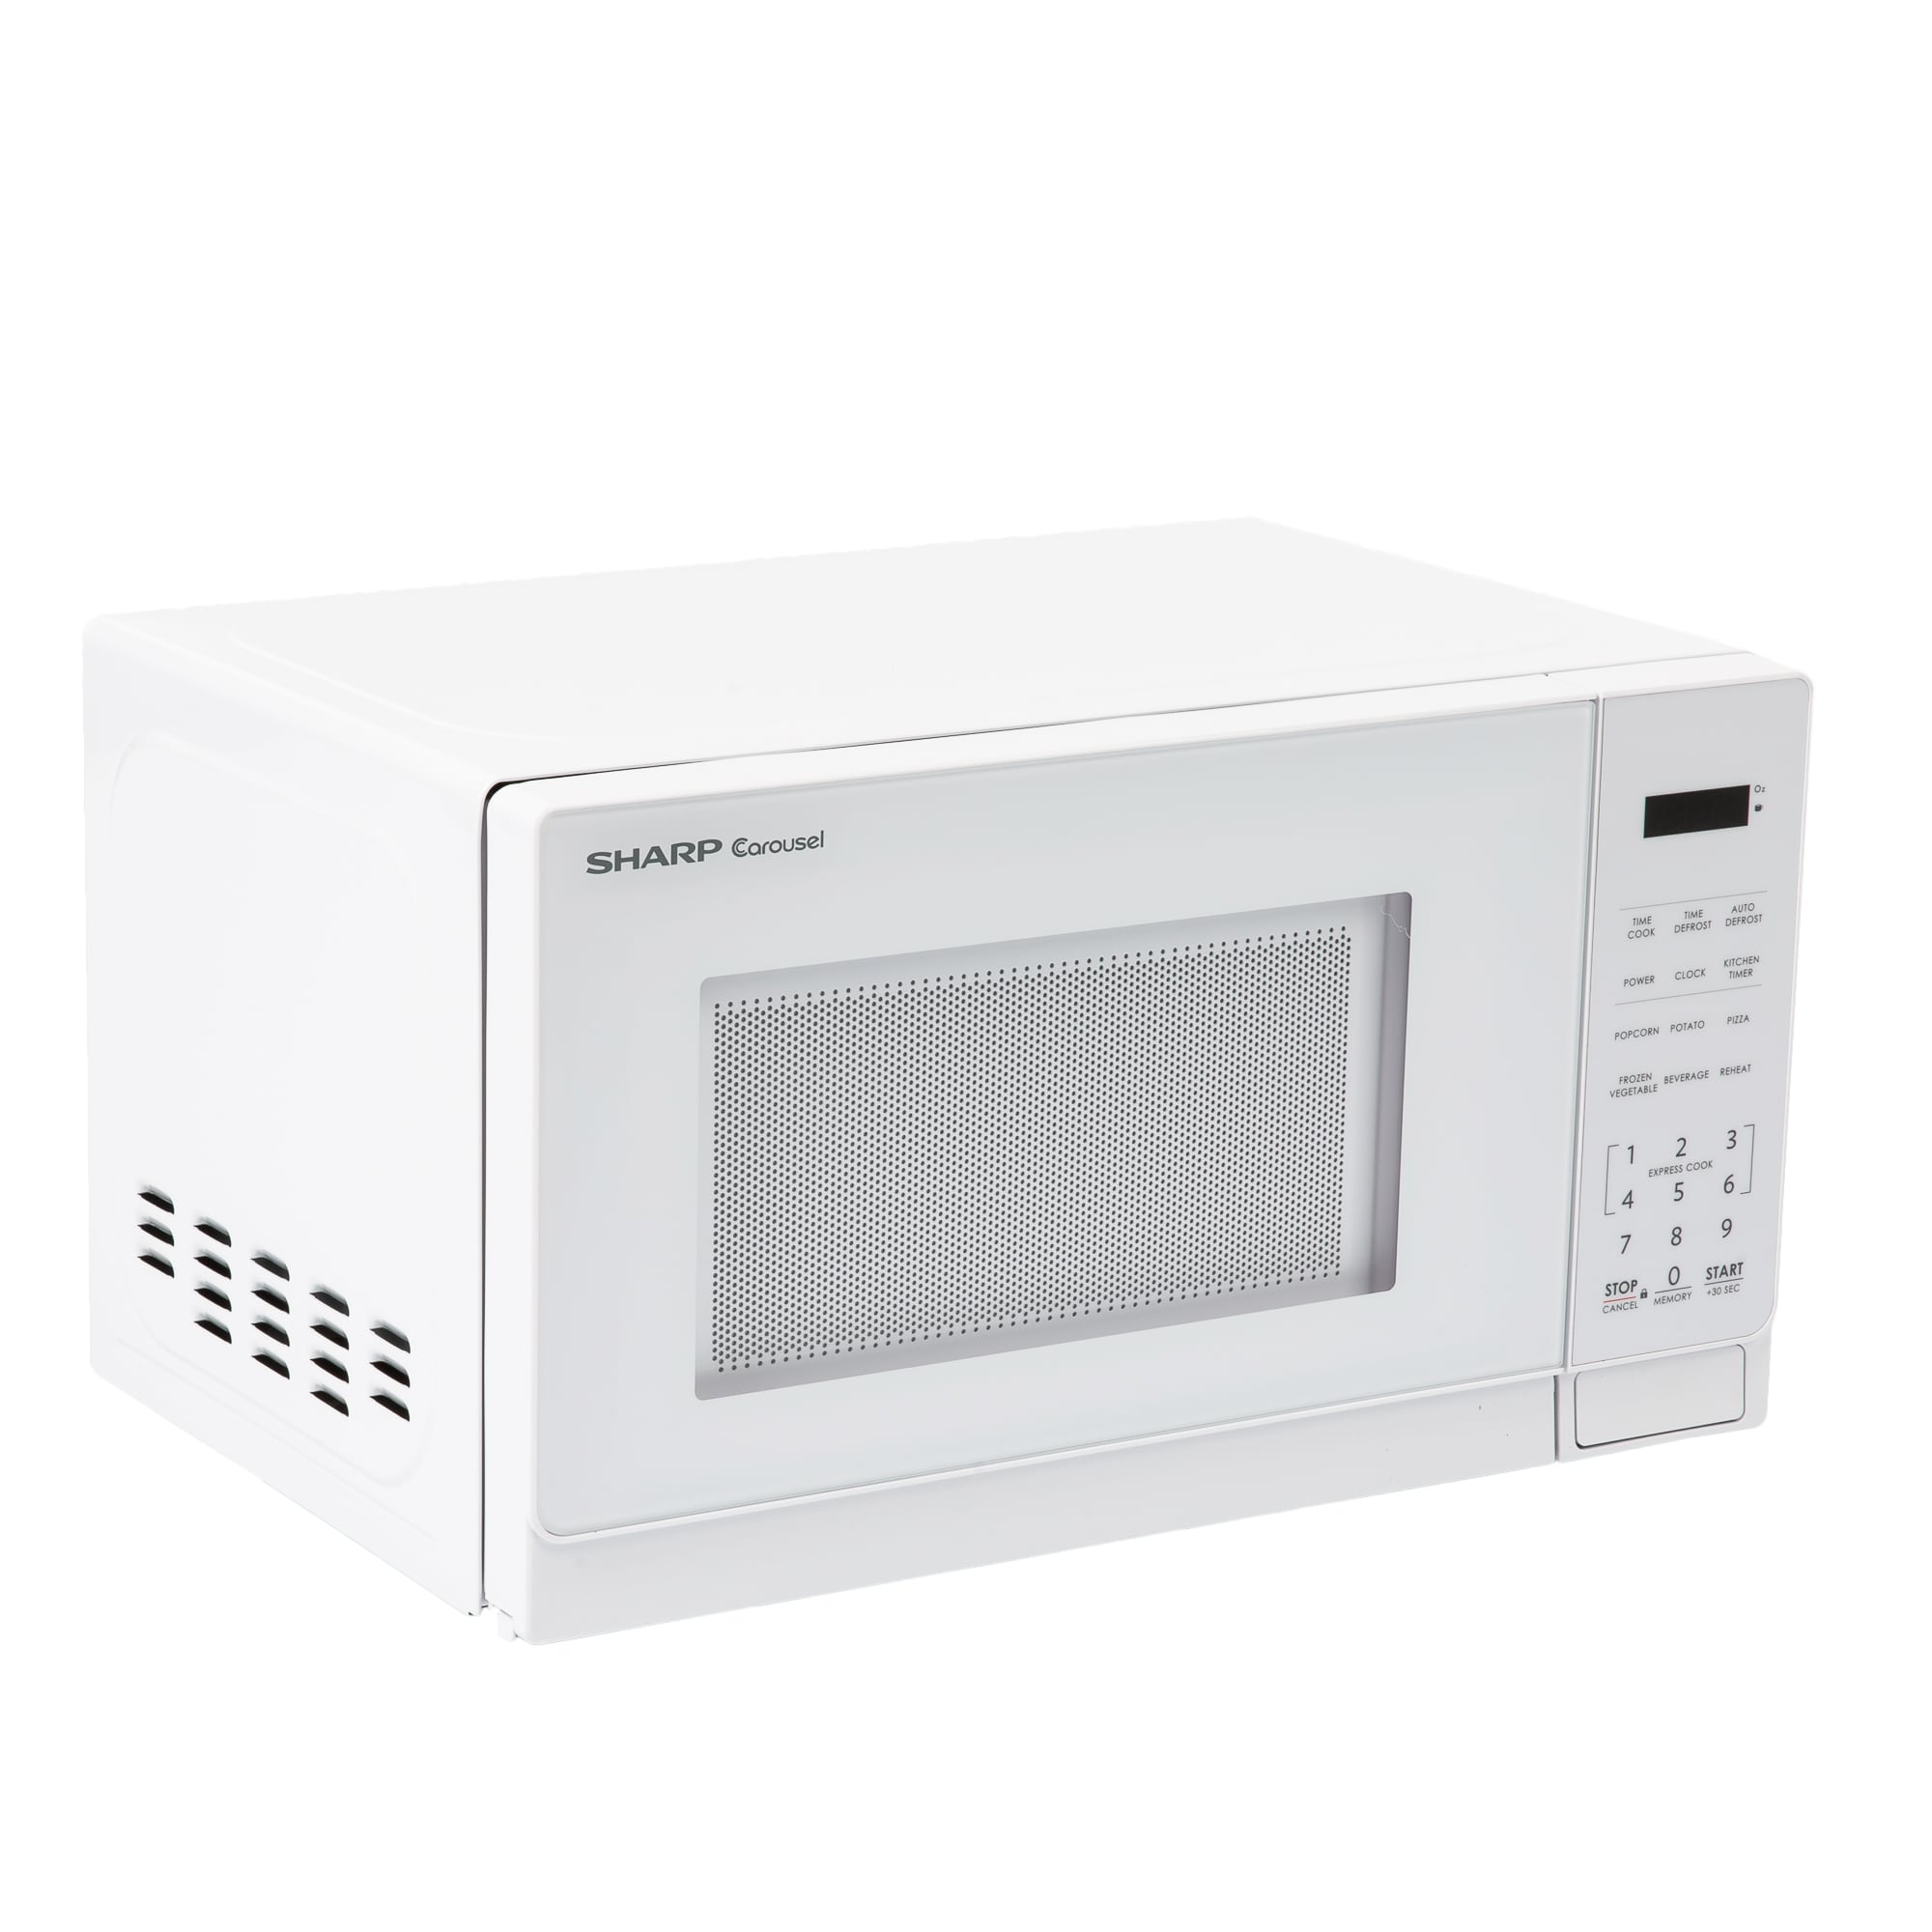 Willz Countertop Small Microwave Oven, 6 Preset Cooking Programs Interior  Light LED Display 0.7 Cu.Ft 700W White WLCMD207WE-07